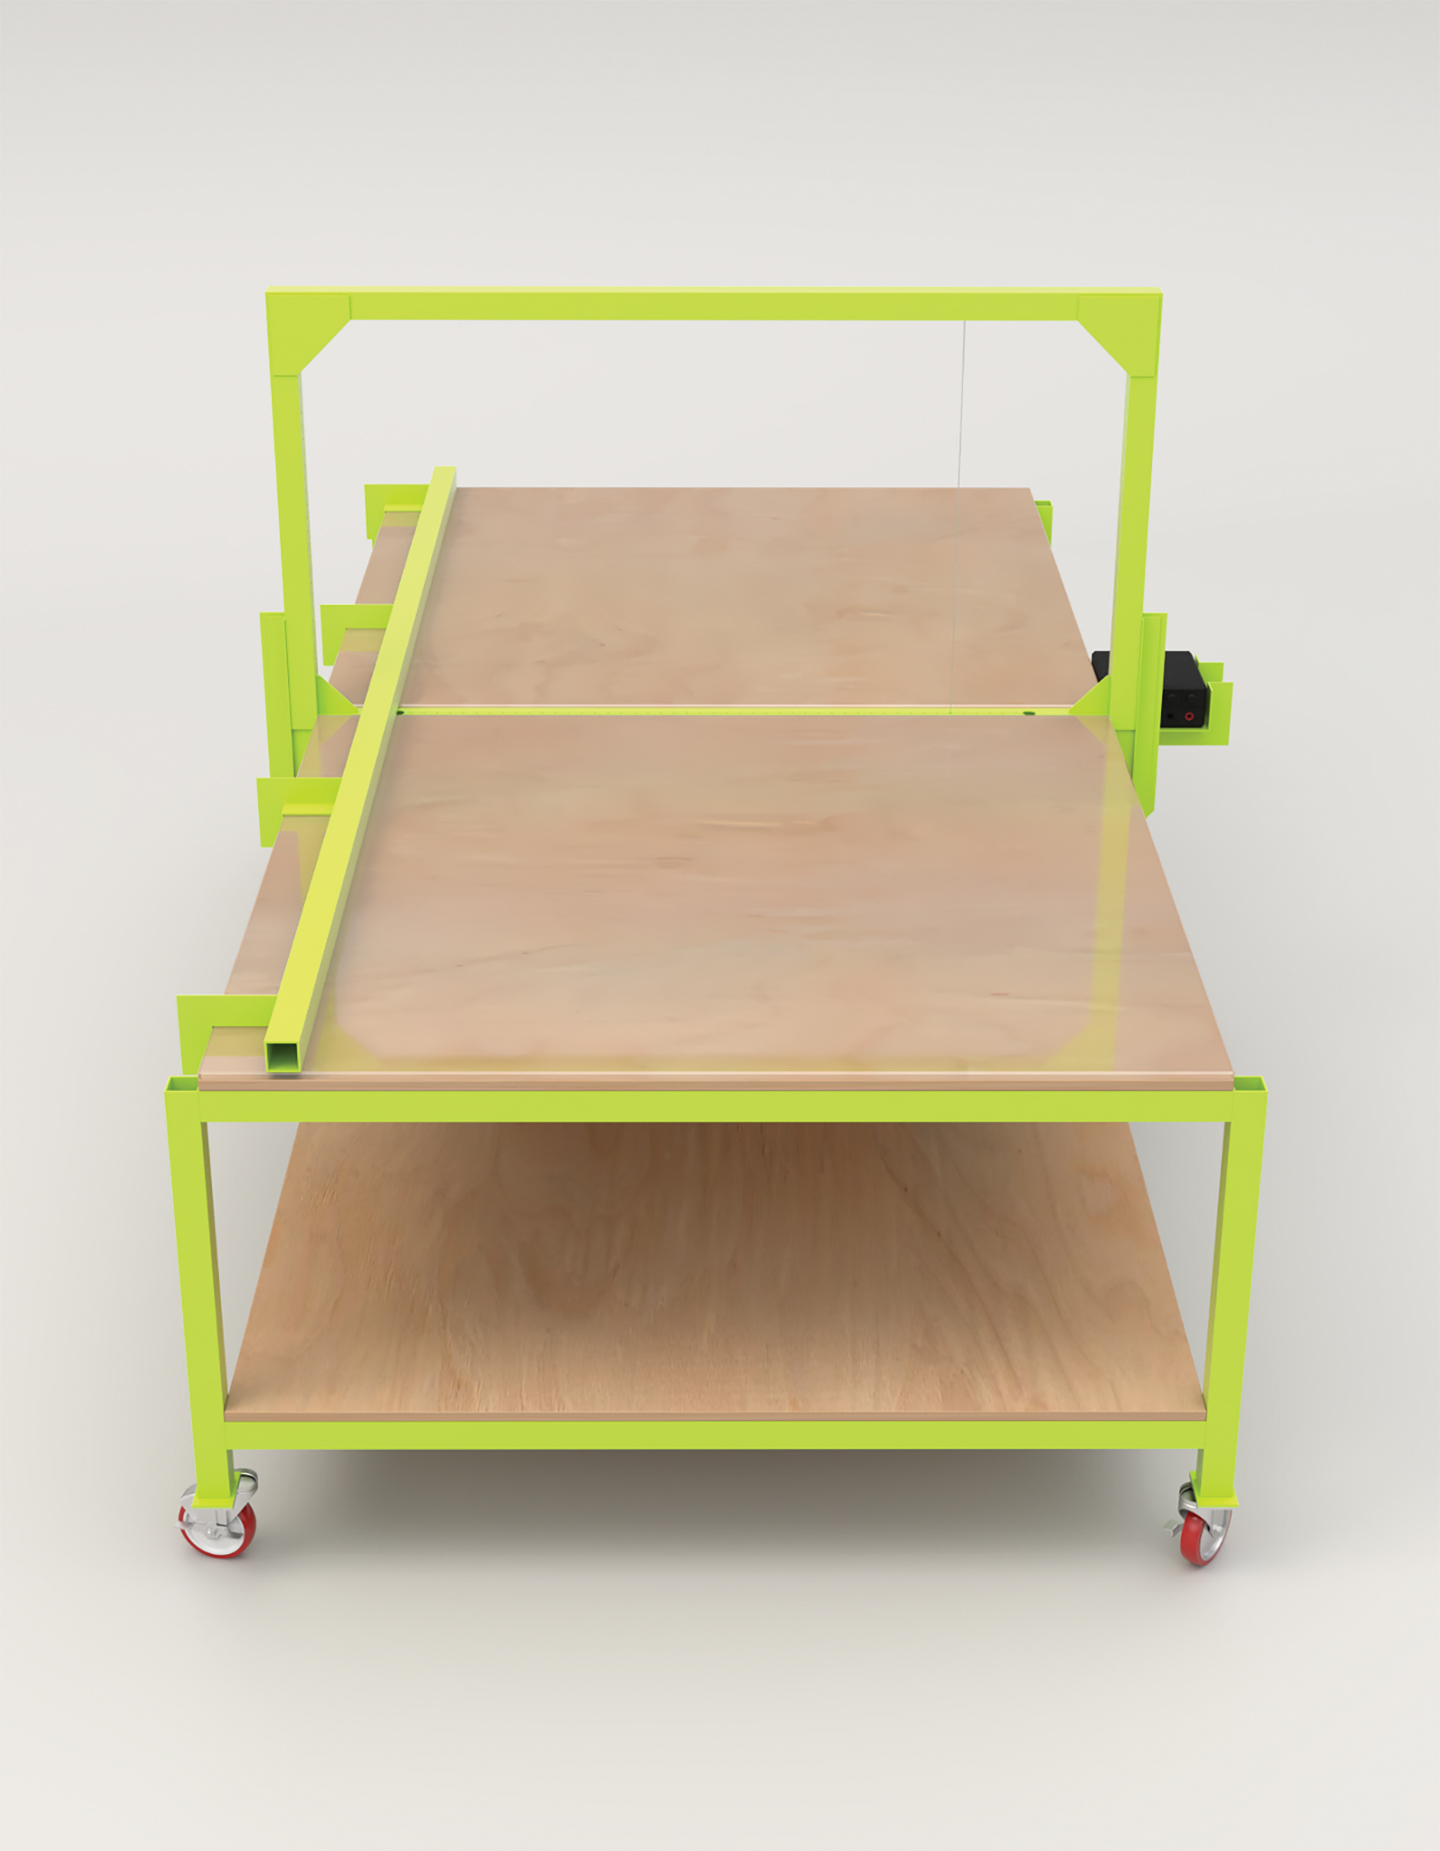 Ekmekjian designed The Wire Table, a custom piece of furniture that acts as a machine to cut EPS foam in one inch increments.